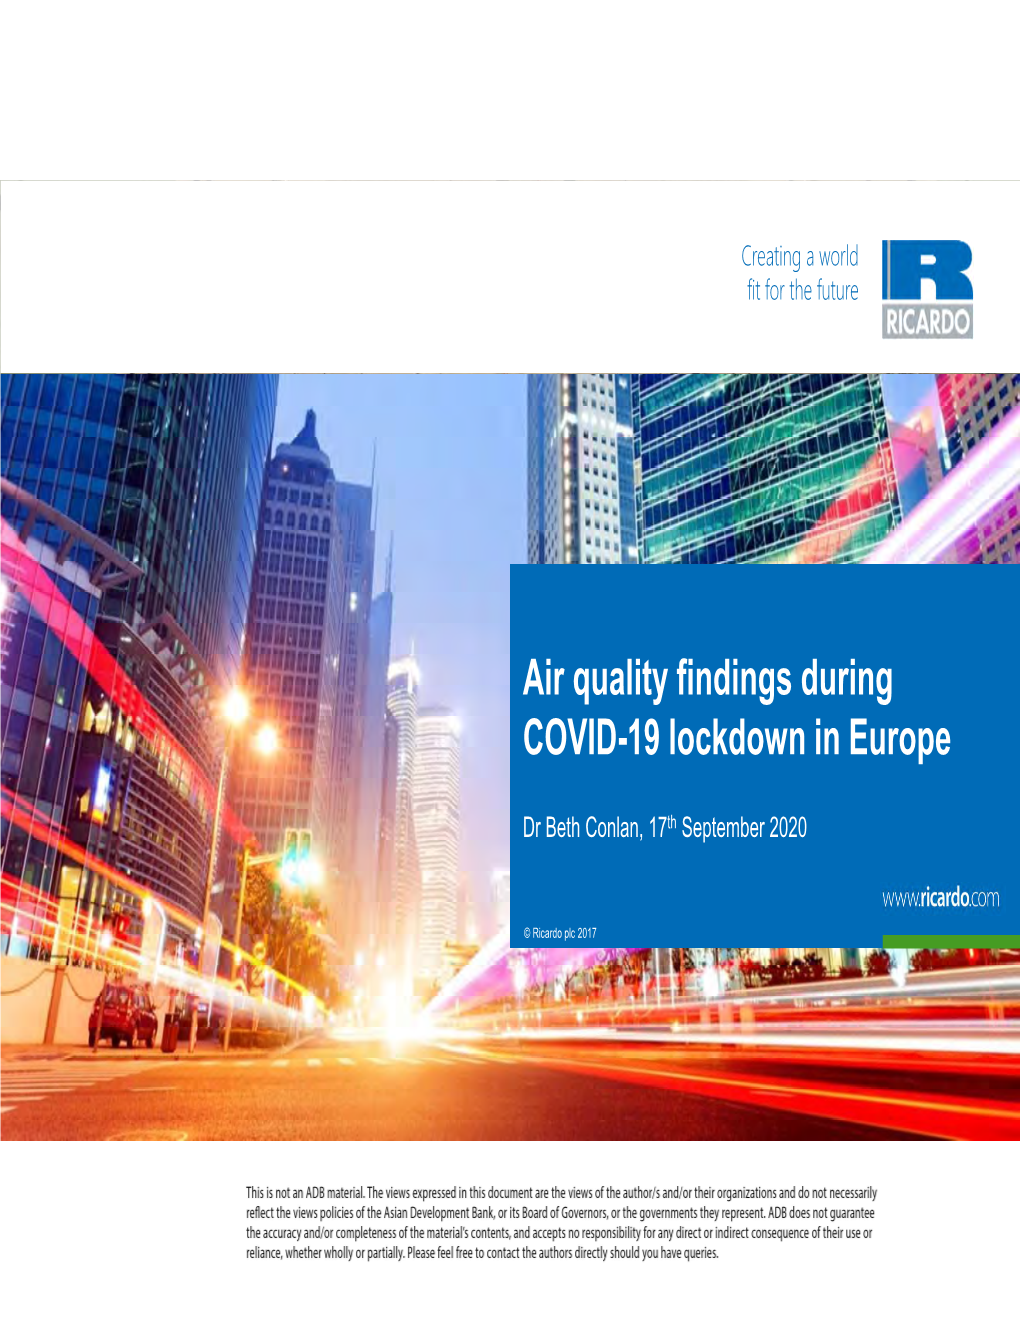 Air Quality Findings During COVID-19 Lockdown in Europe